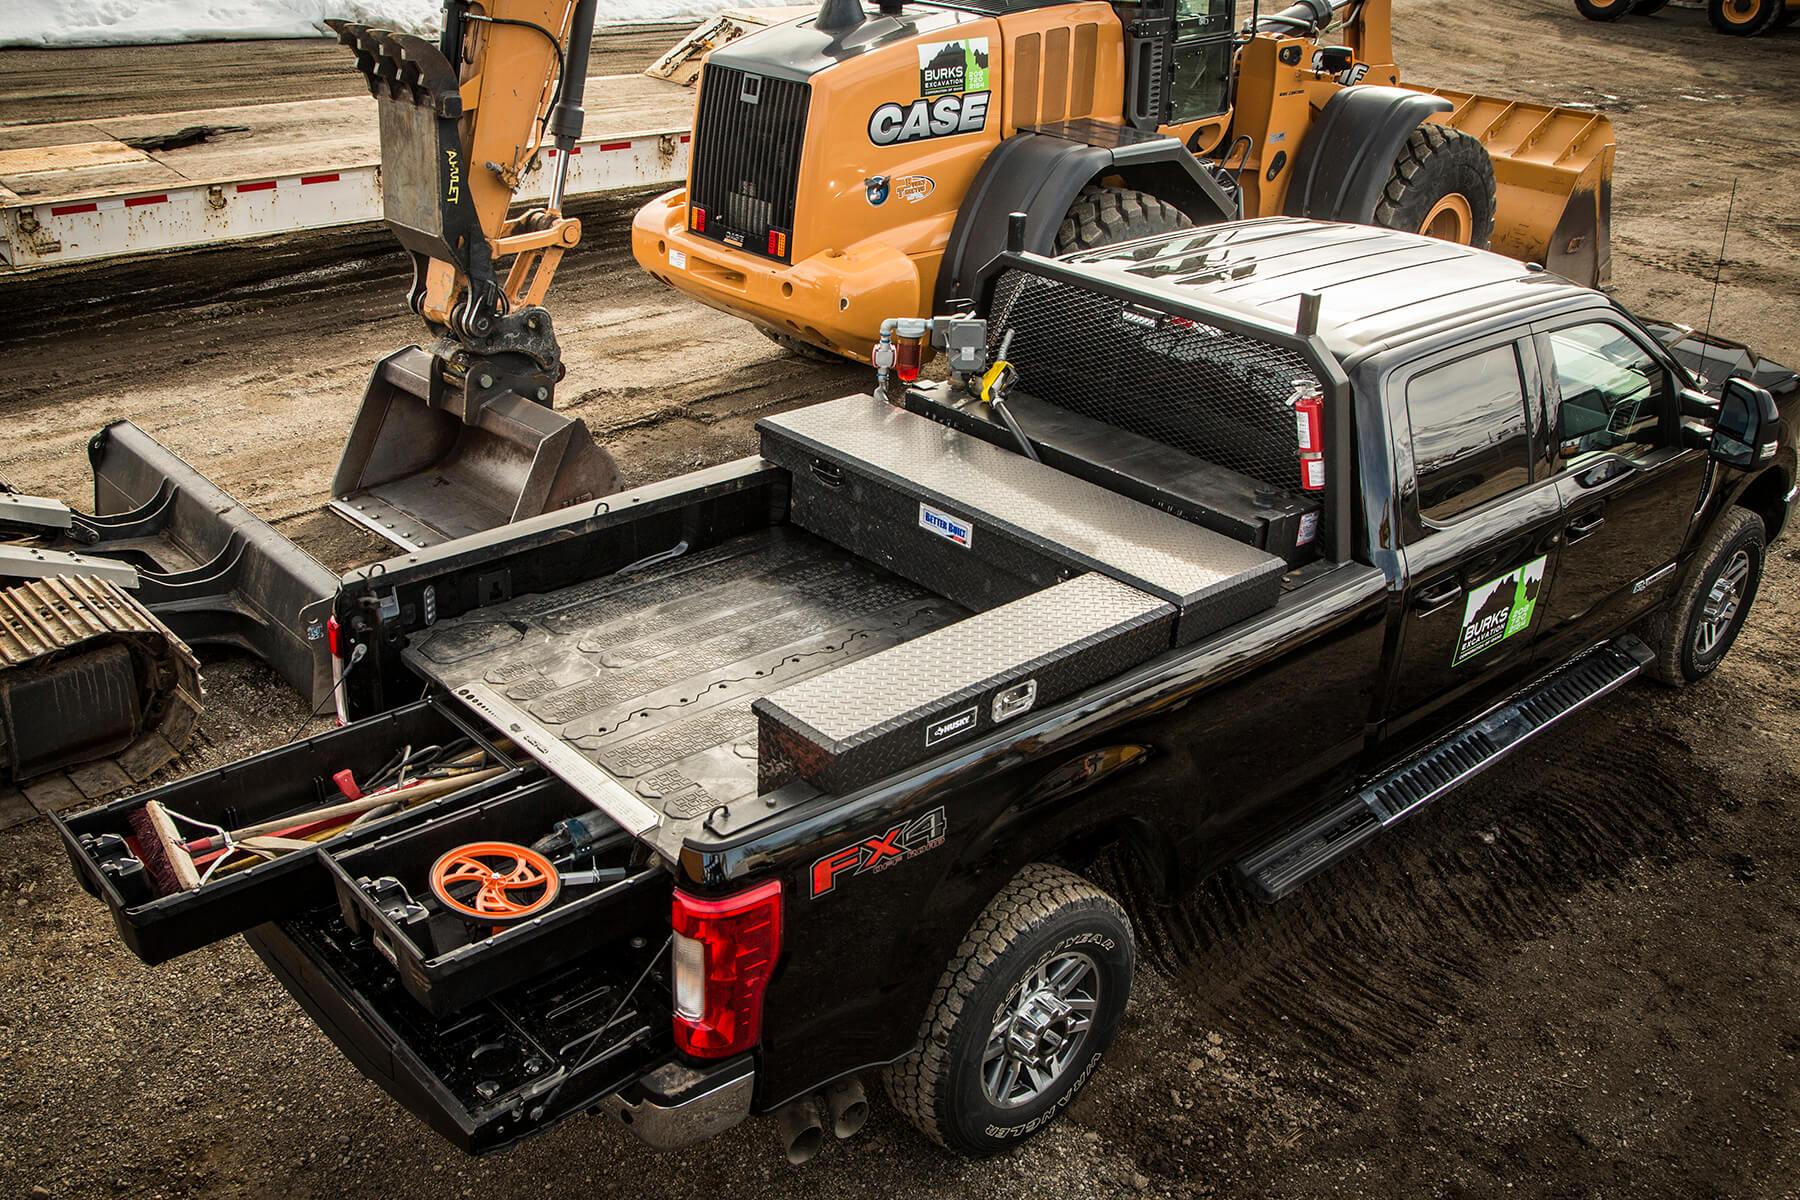 DECKED Ford Super Duty Truck Bed Storage System and Organizer